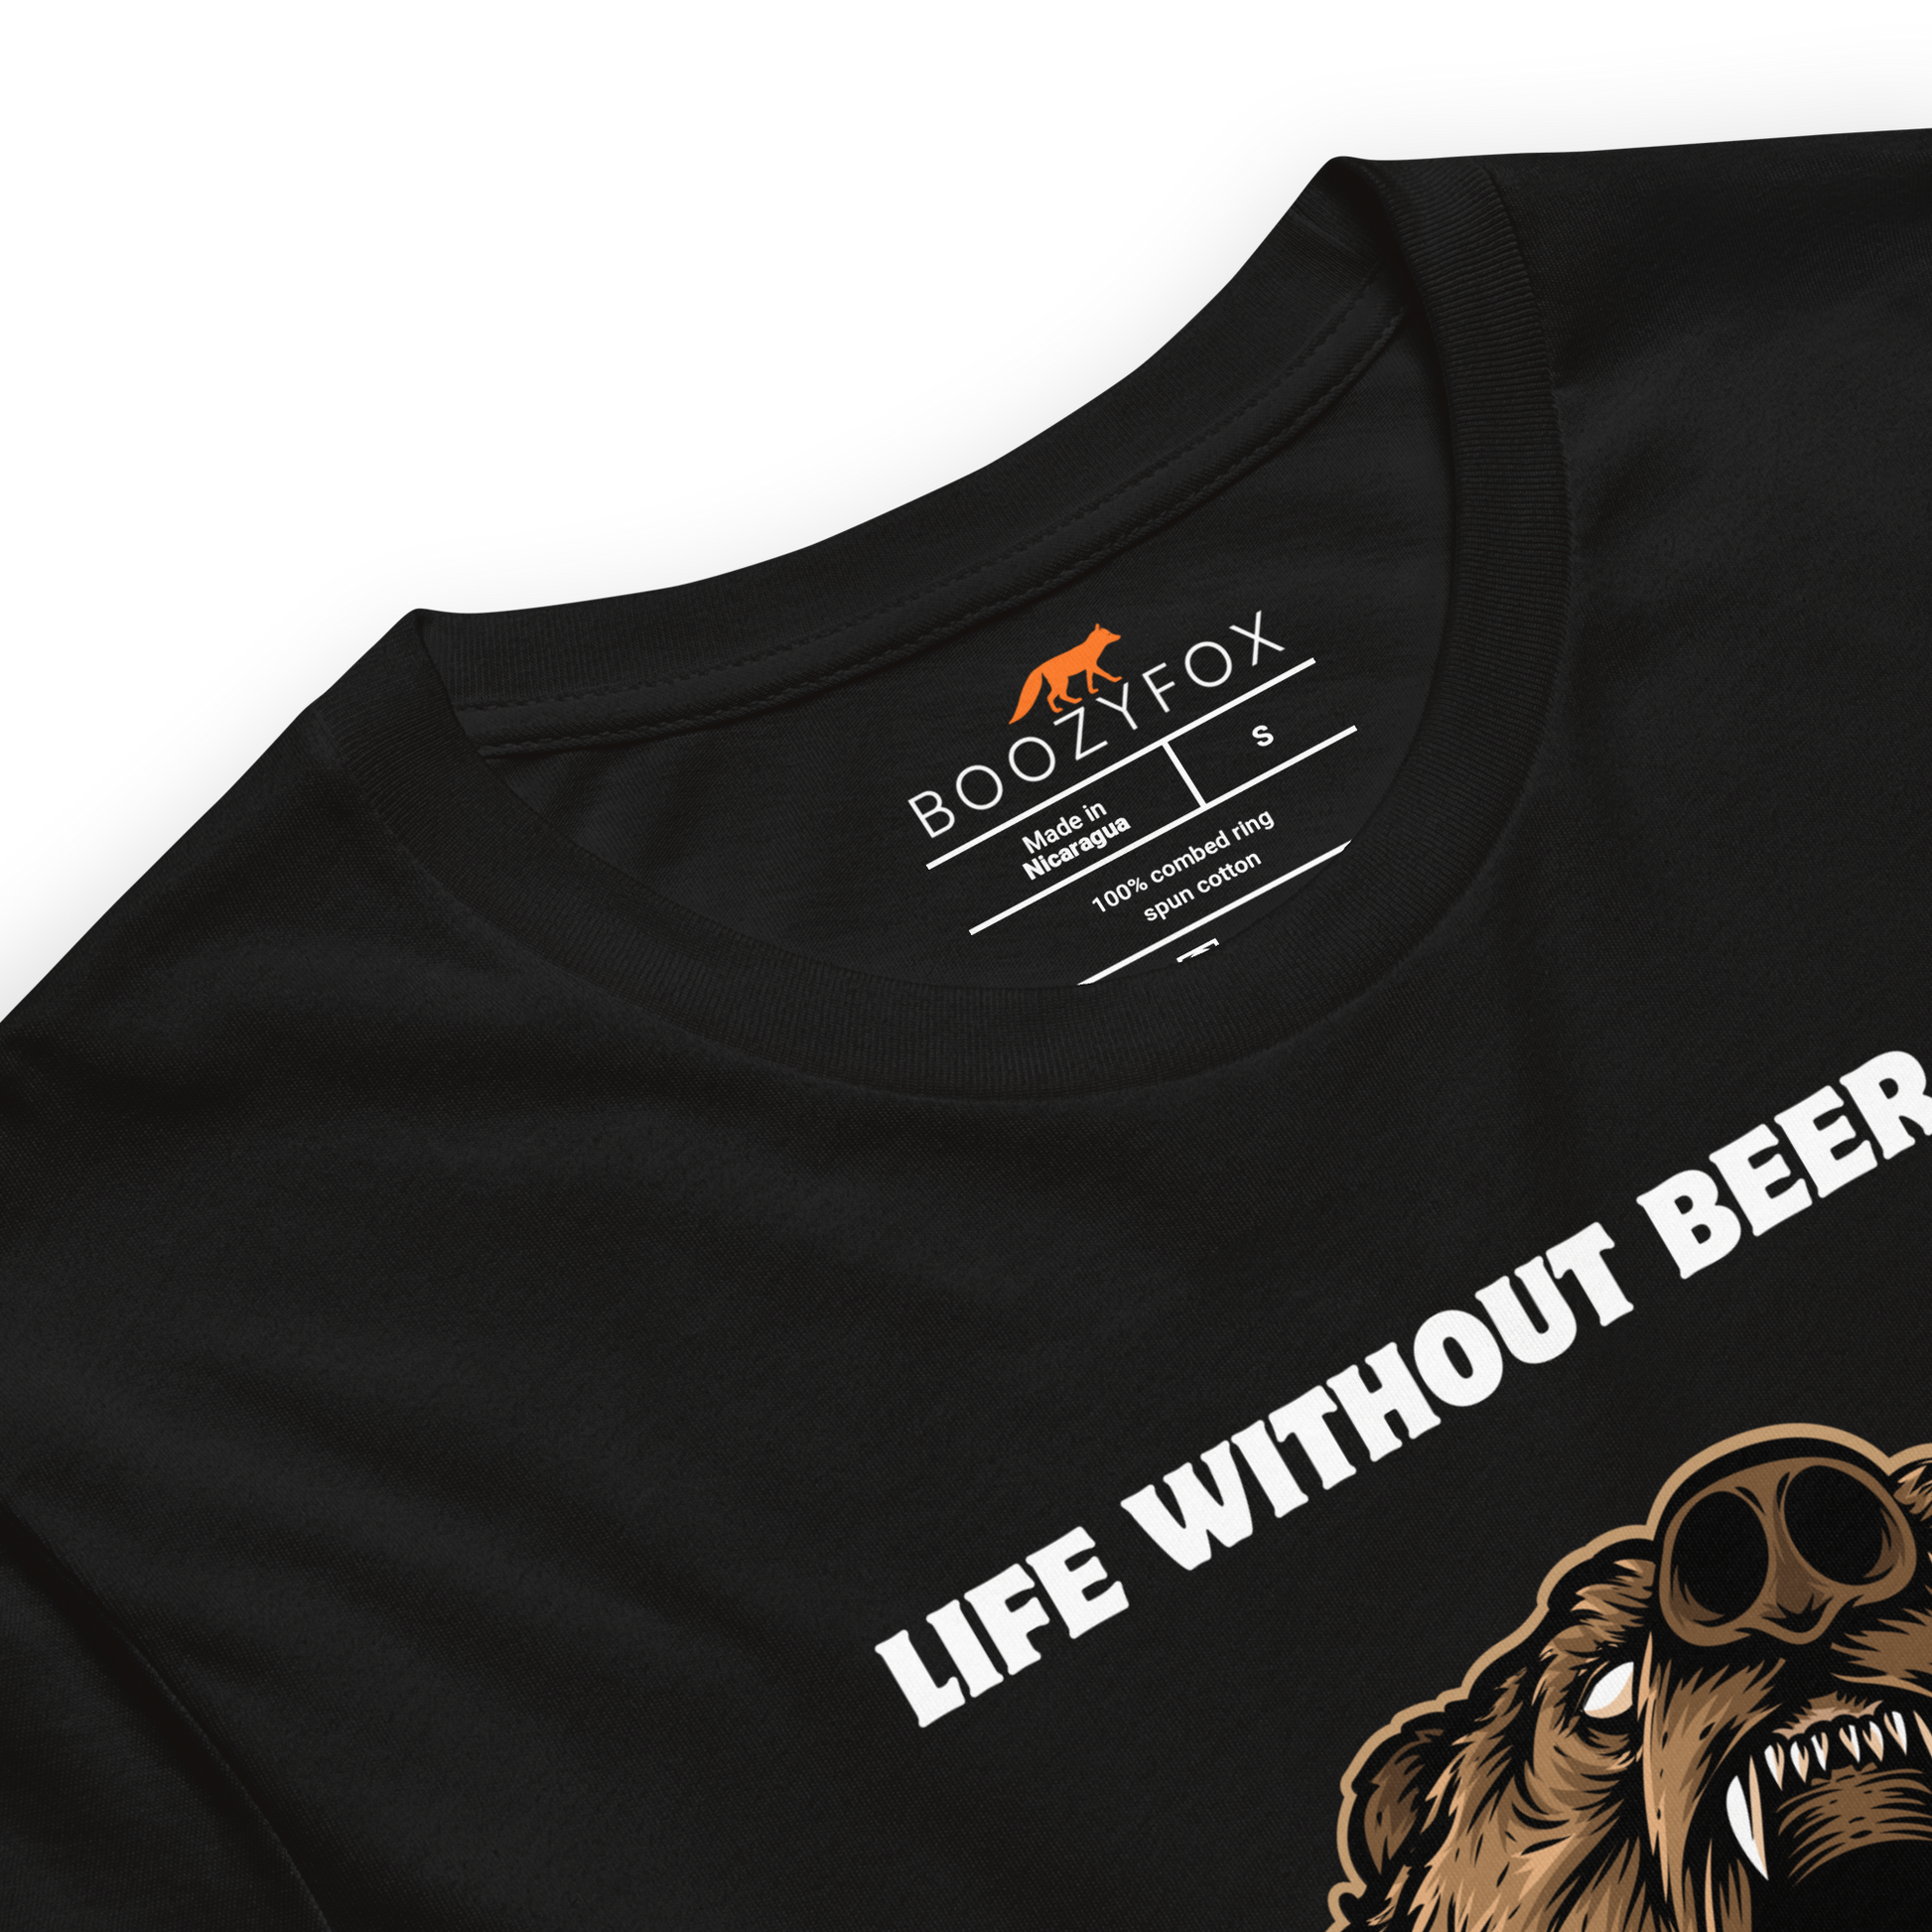 Product details of a Black Premium Bear Tee featuring a Life Without Beer Is Unbeerable graphic design on the chest - Funny Graphic Bear Tees - Boozy Fox